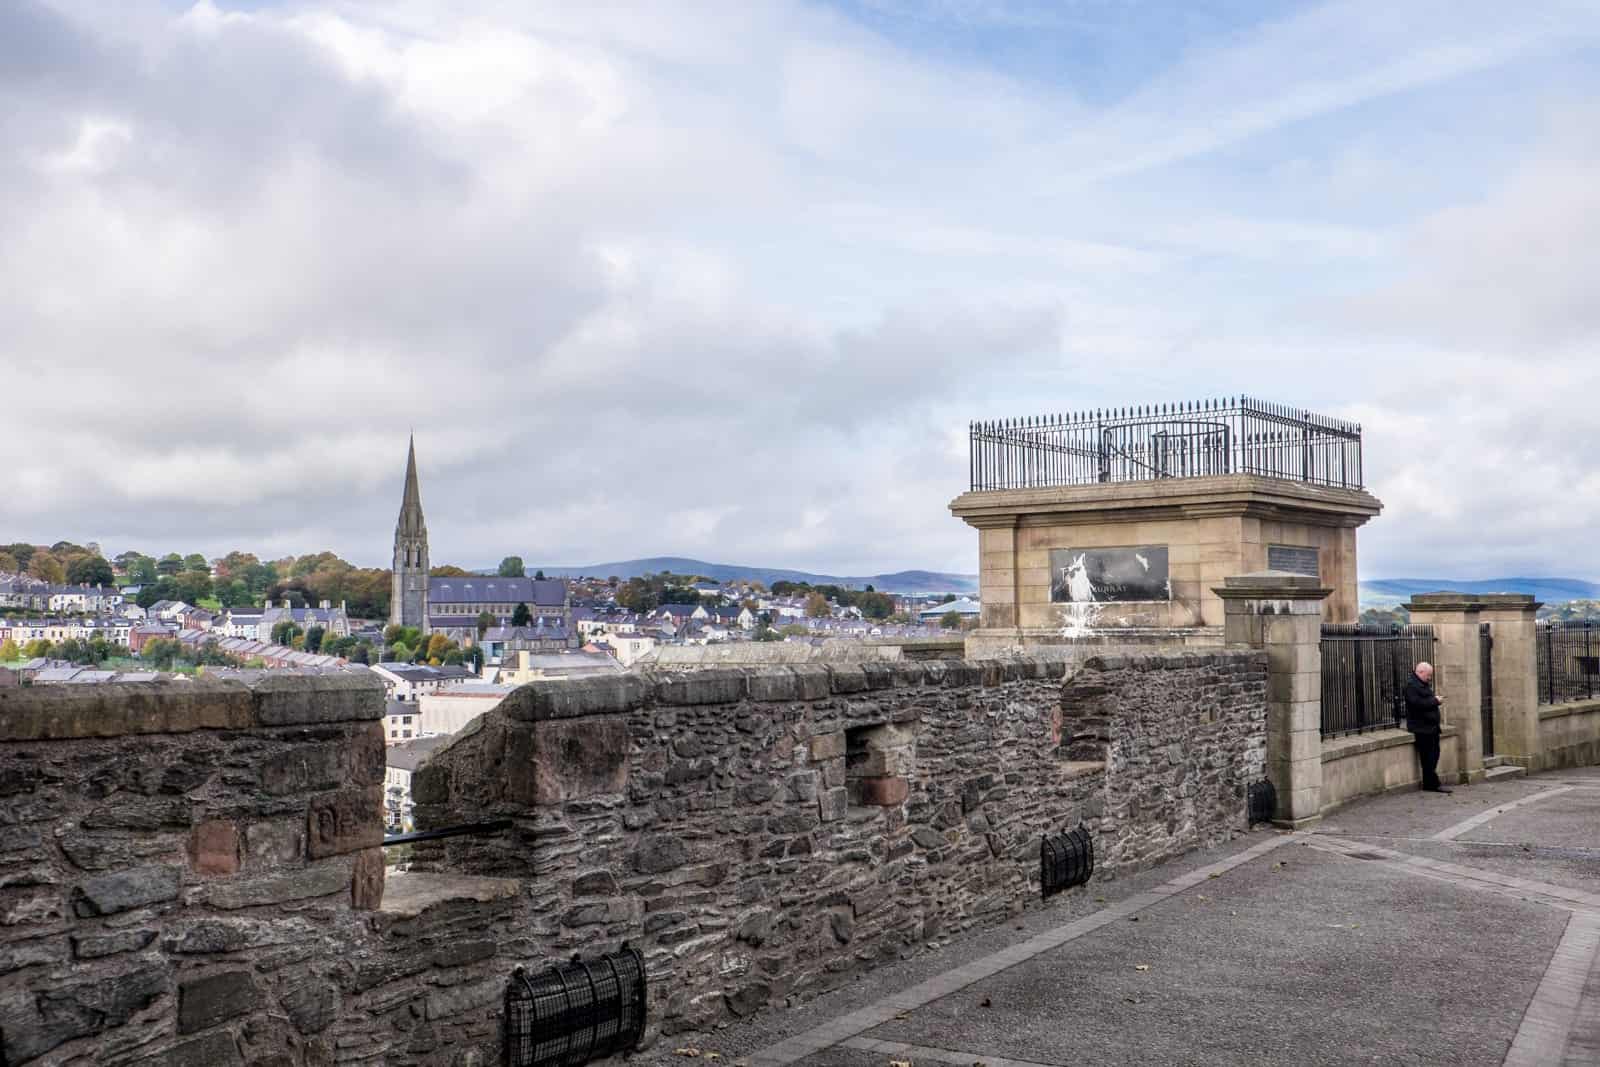 The old wall of Londonderry / Derry city, Northern Ireland